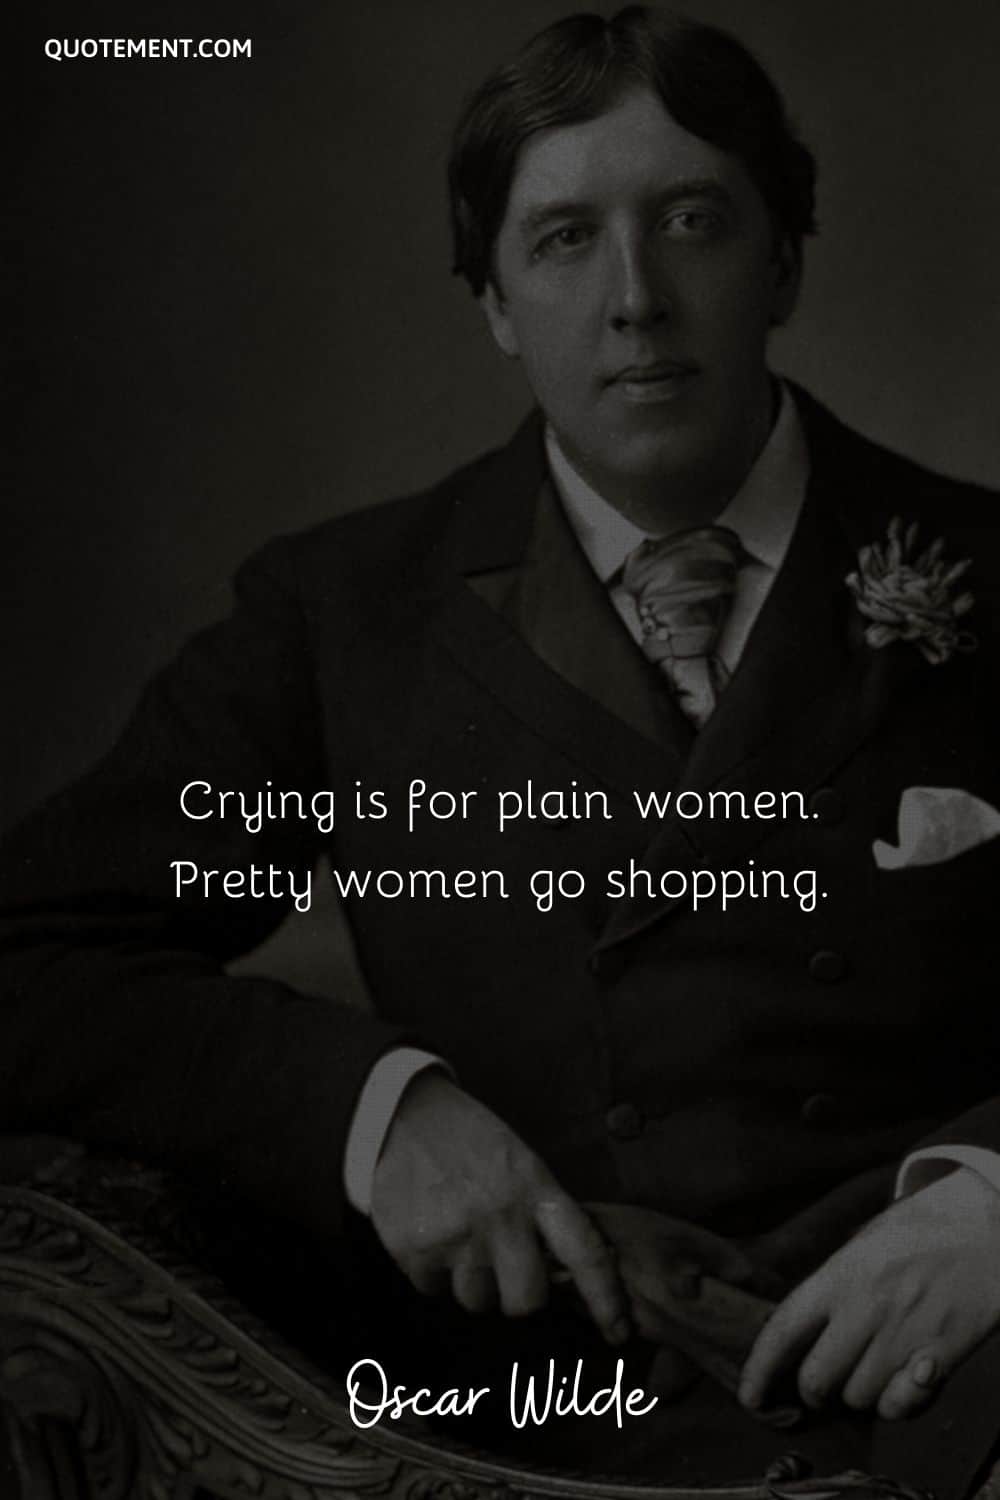 Crying is for plain women